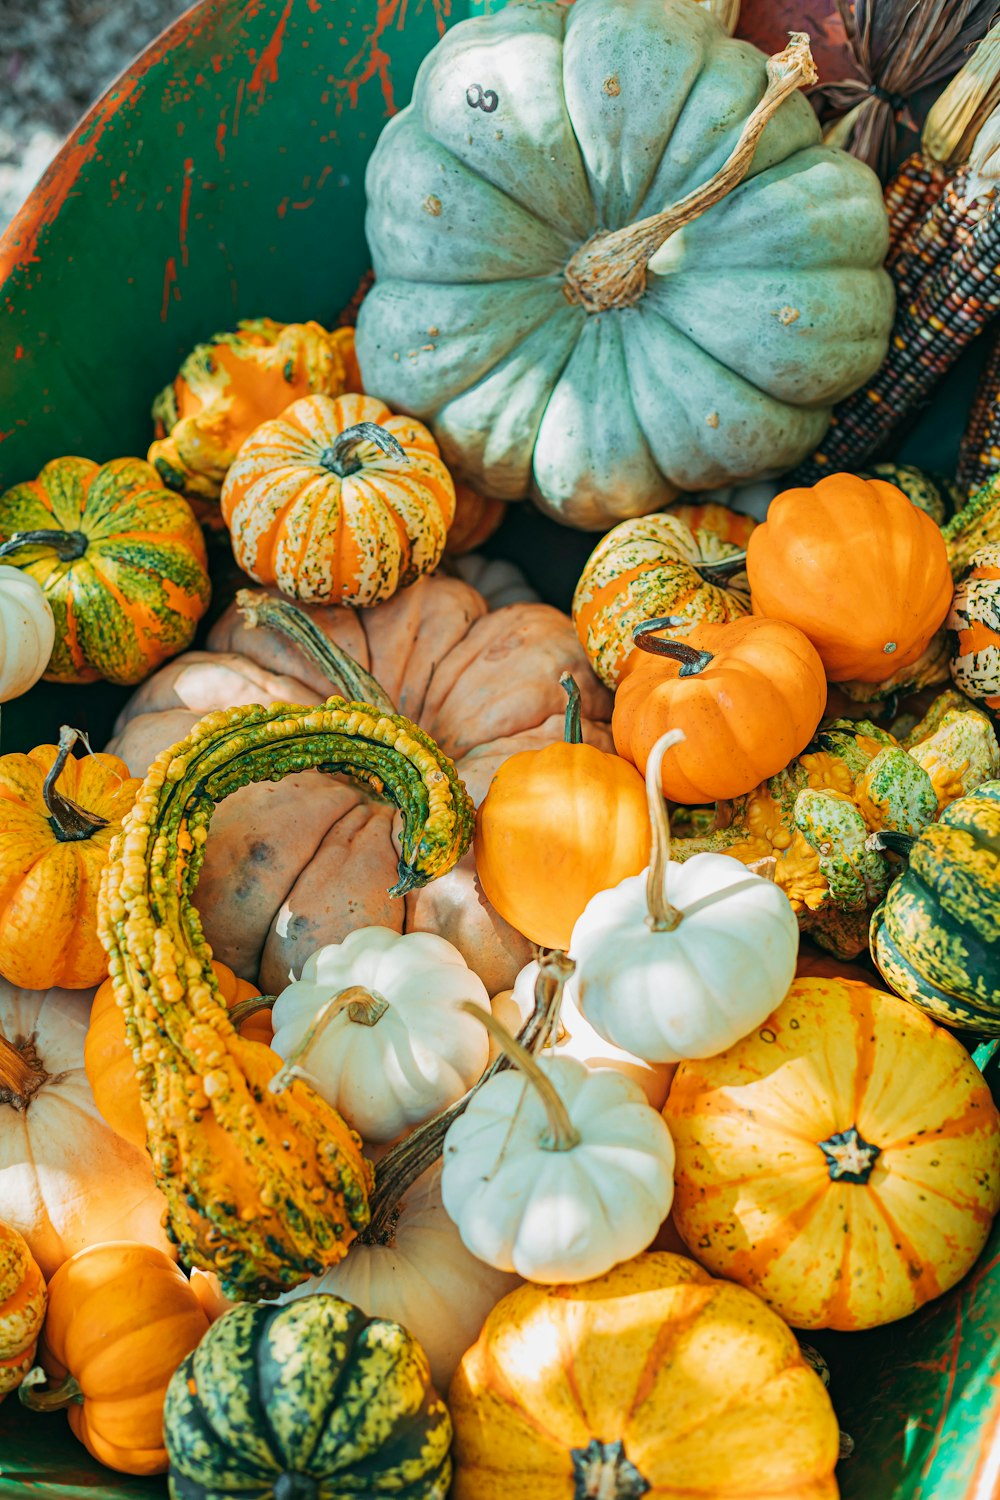 orange and green pumpkins on blue plastic container